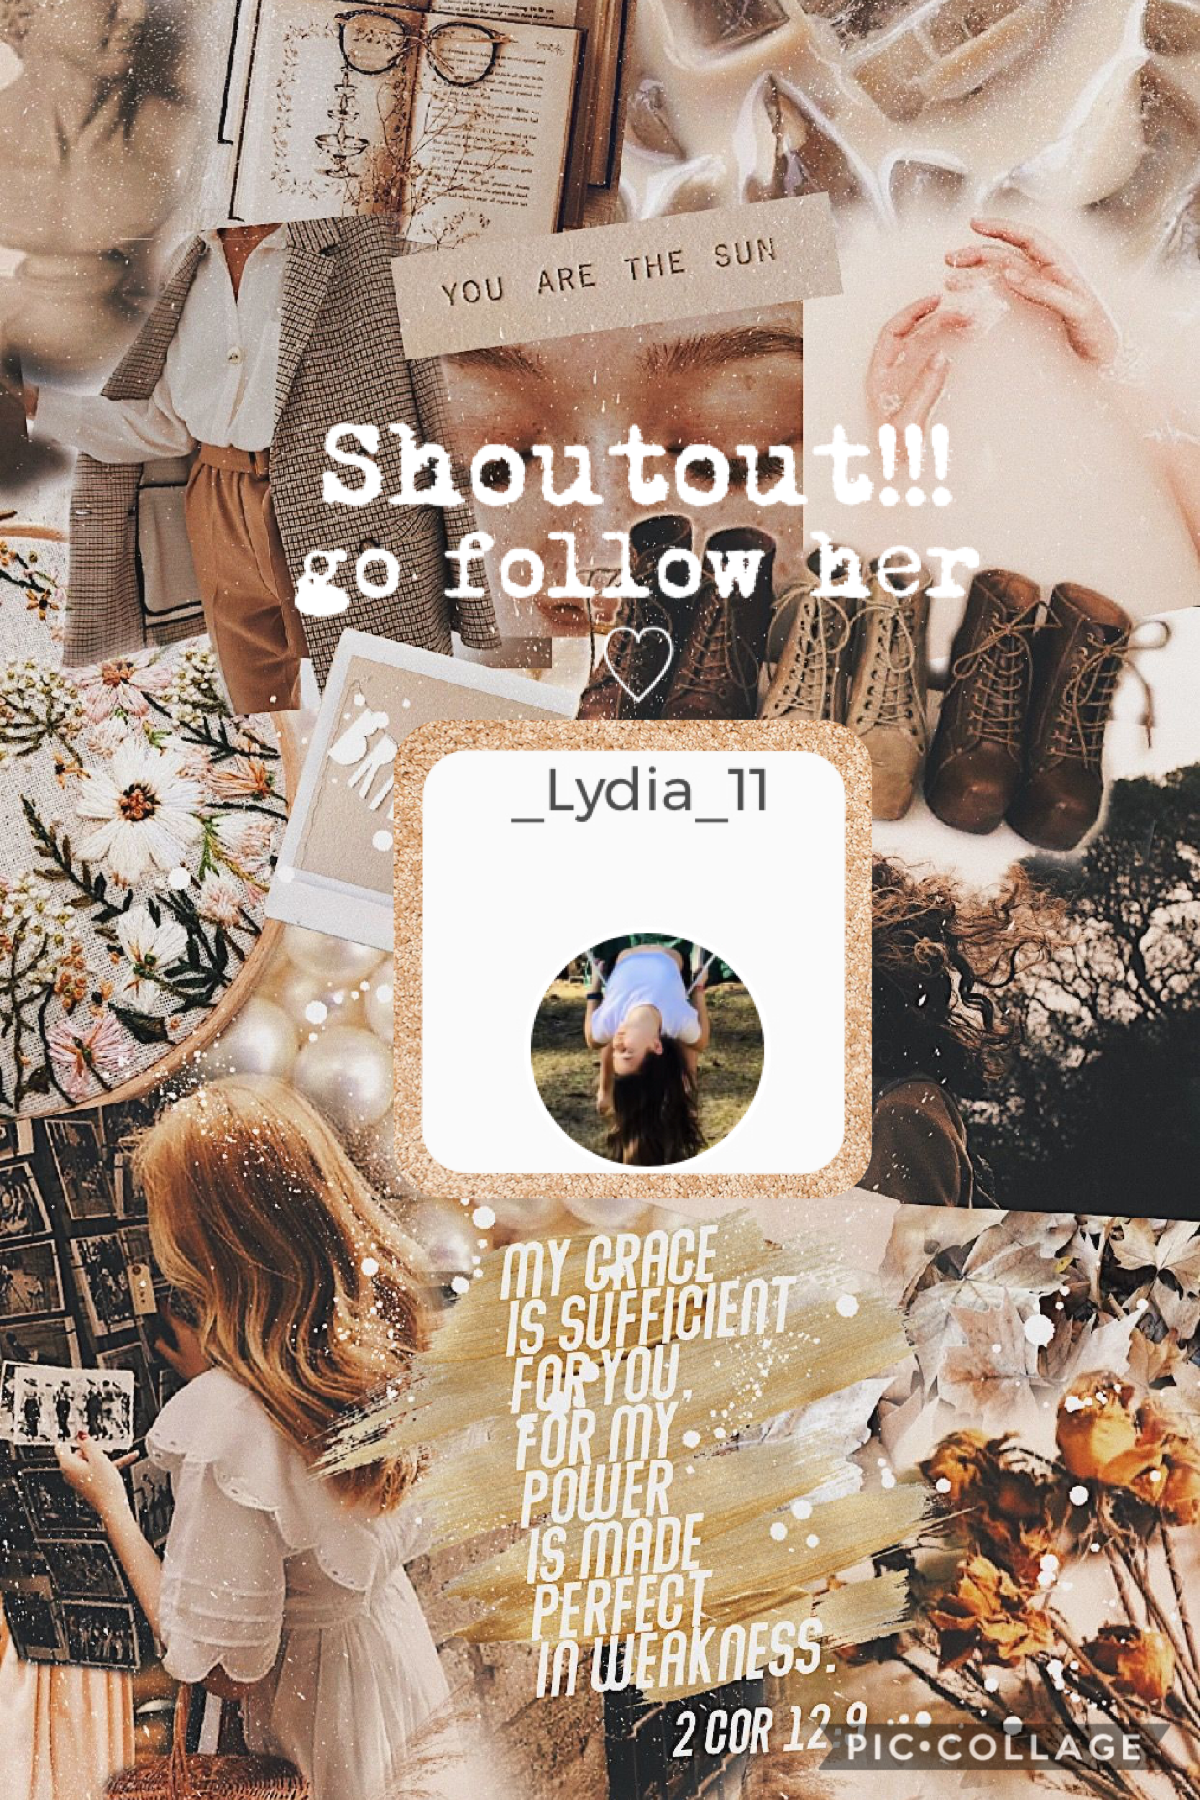 Go follow _Lydia_11! She makes great collages 💛